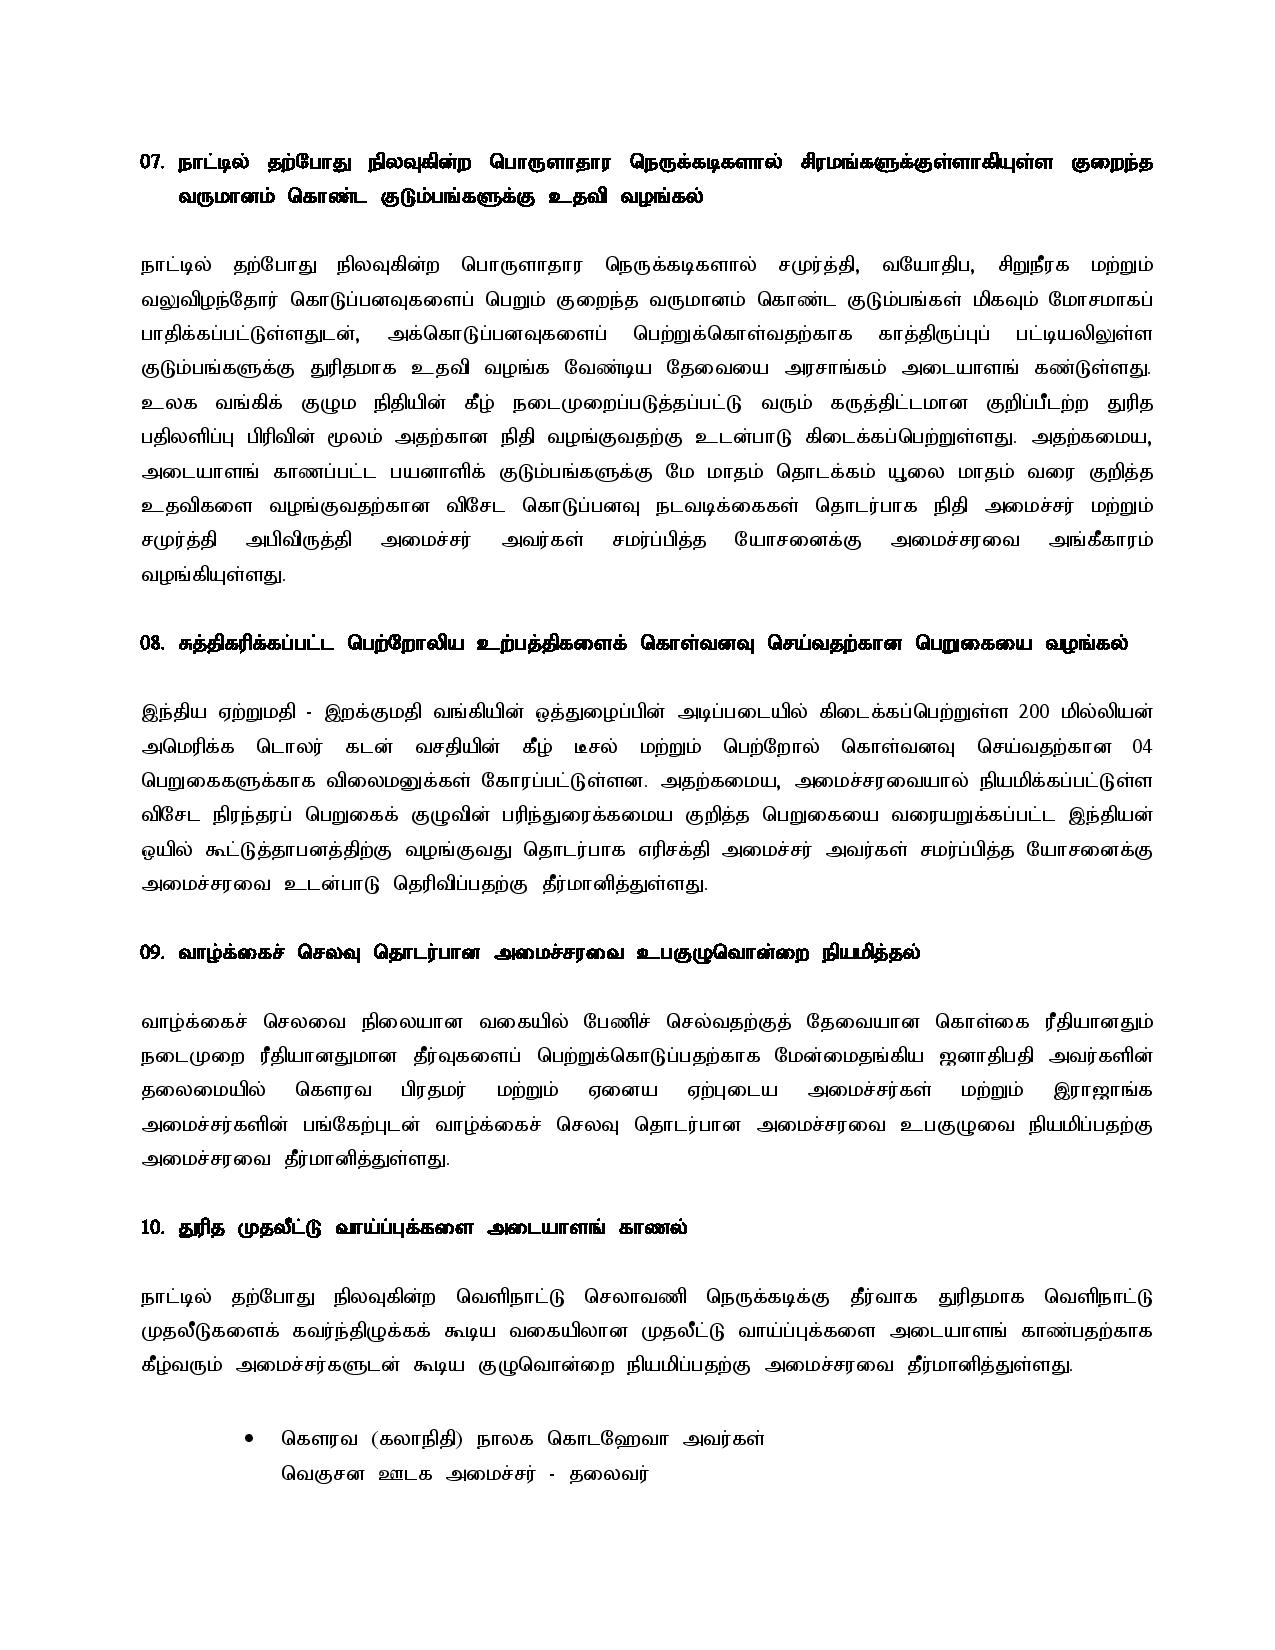 Cabinet Decisions on 02.05.2022 Tamil page 003